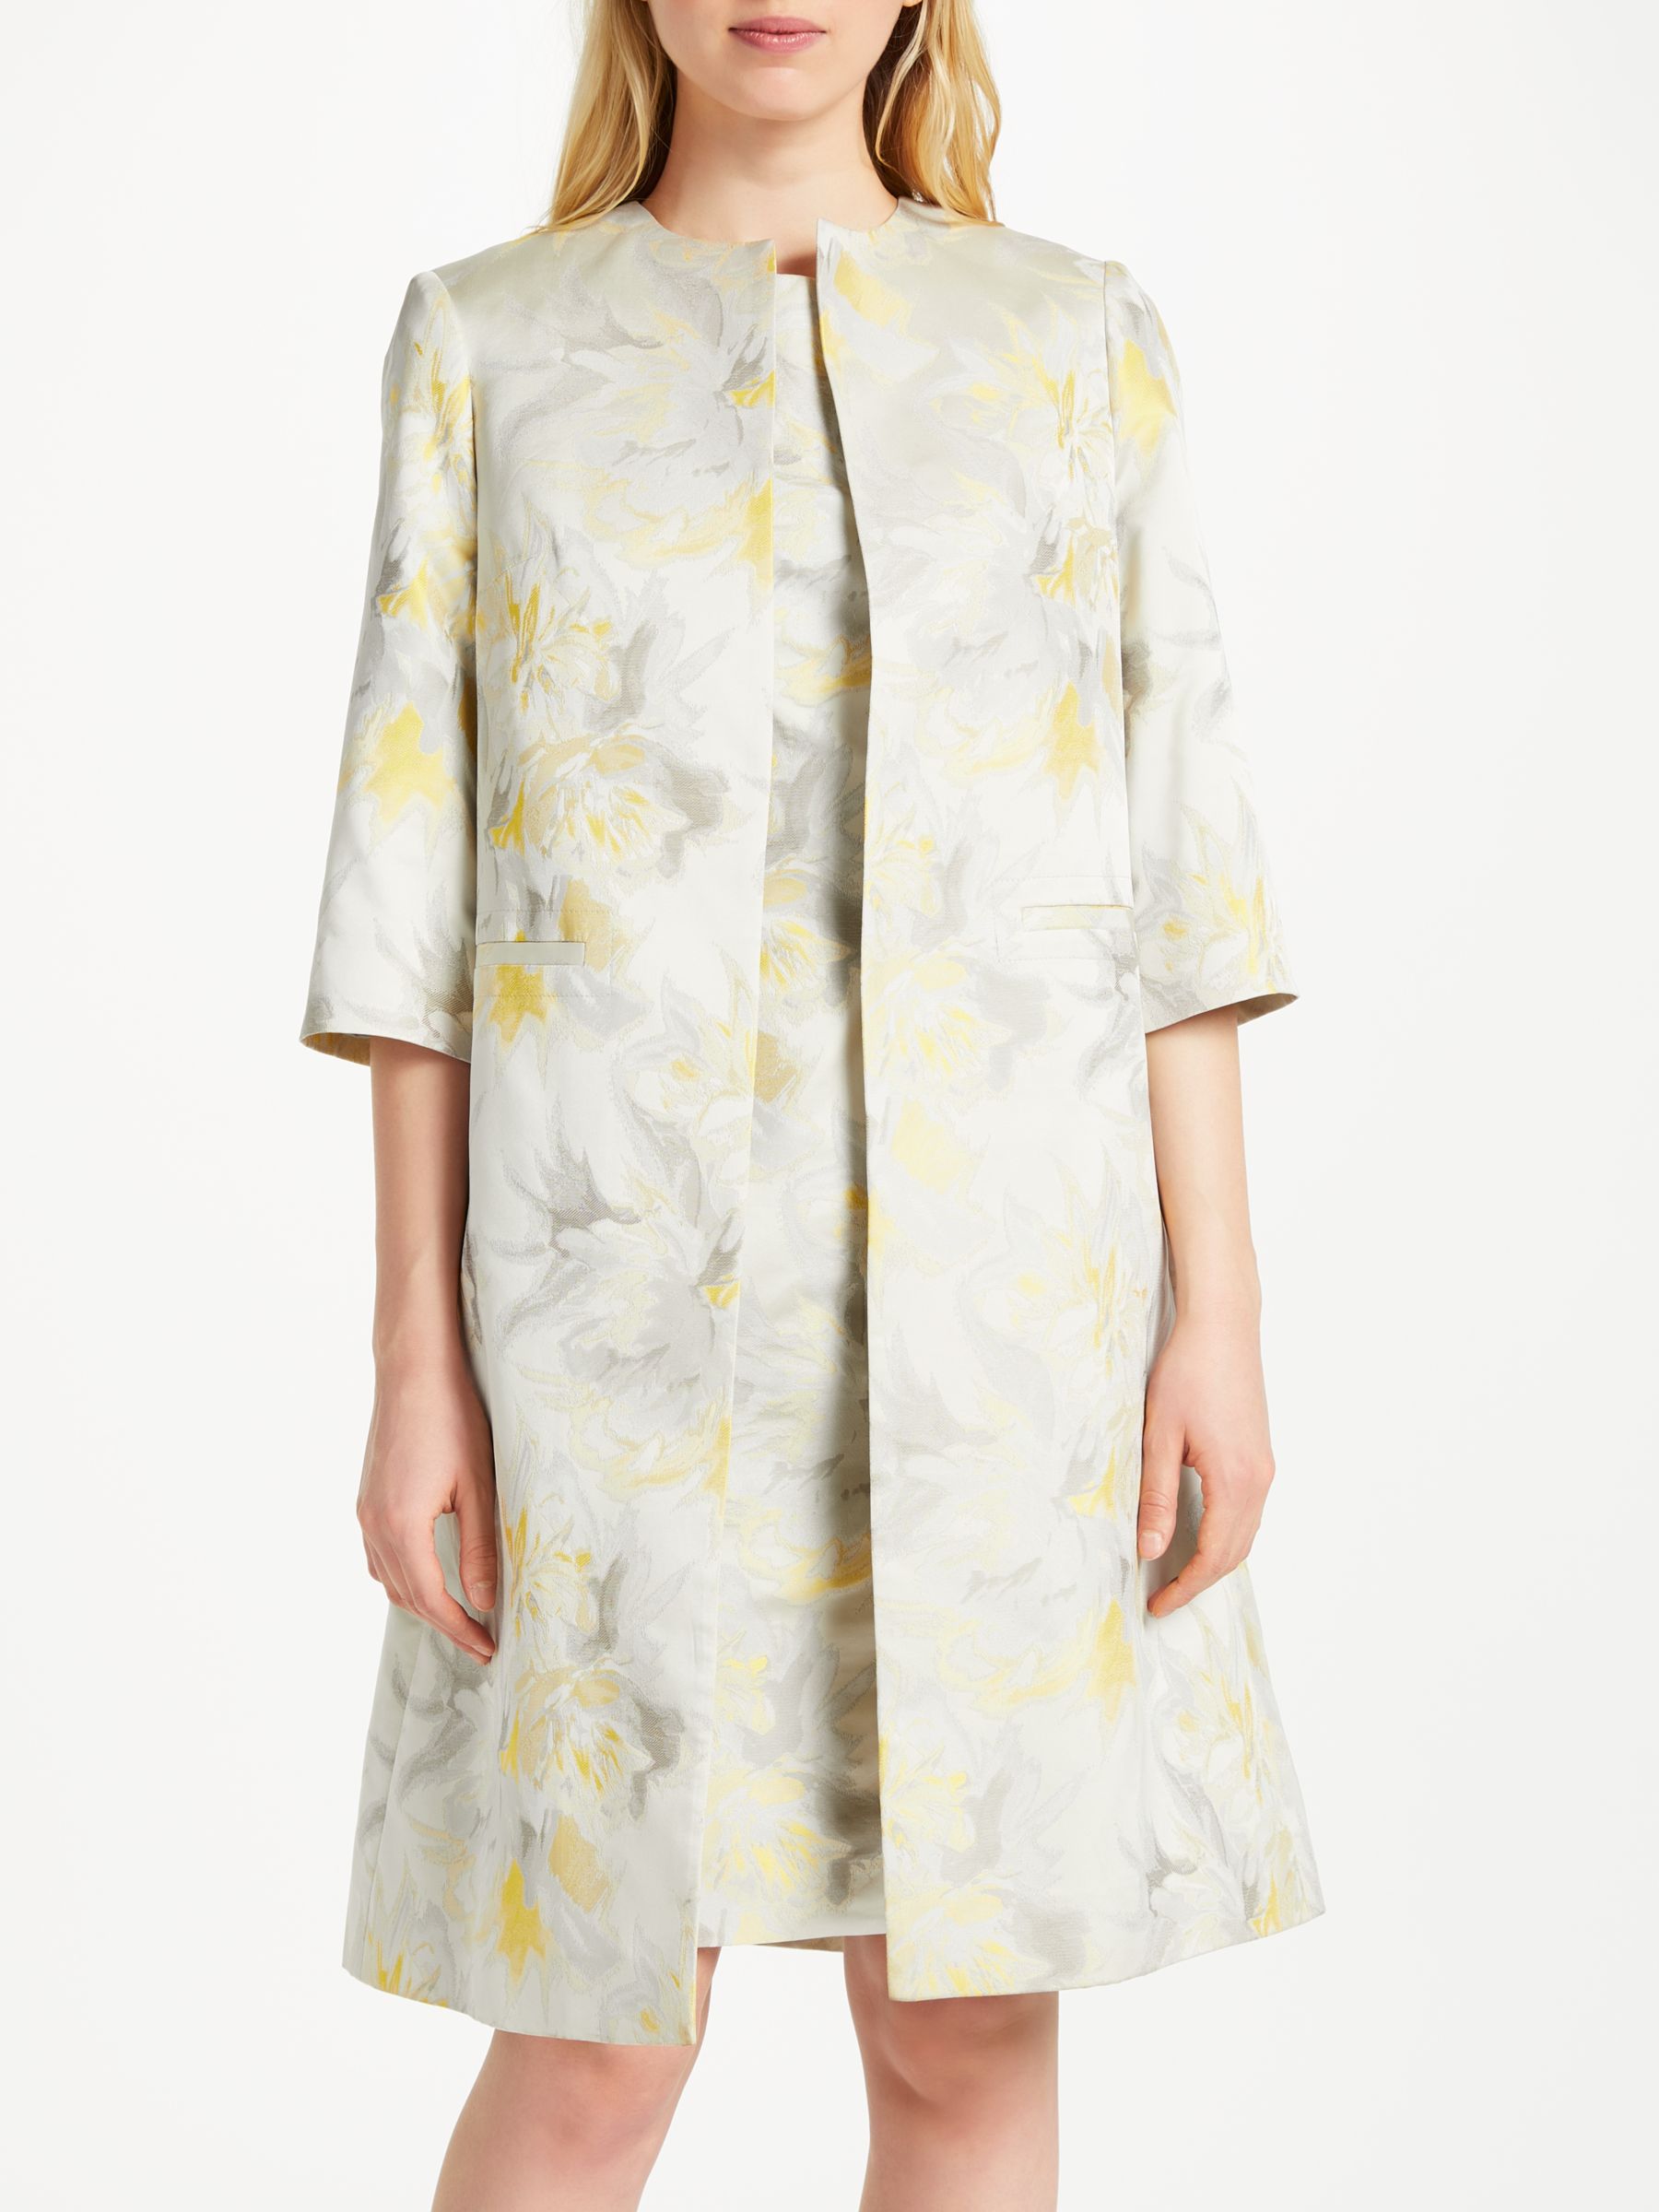 Bruce by Bruce Oldfield Jacquard Coat, Yellow